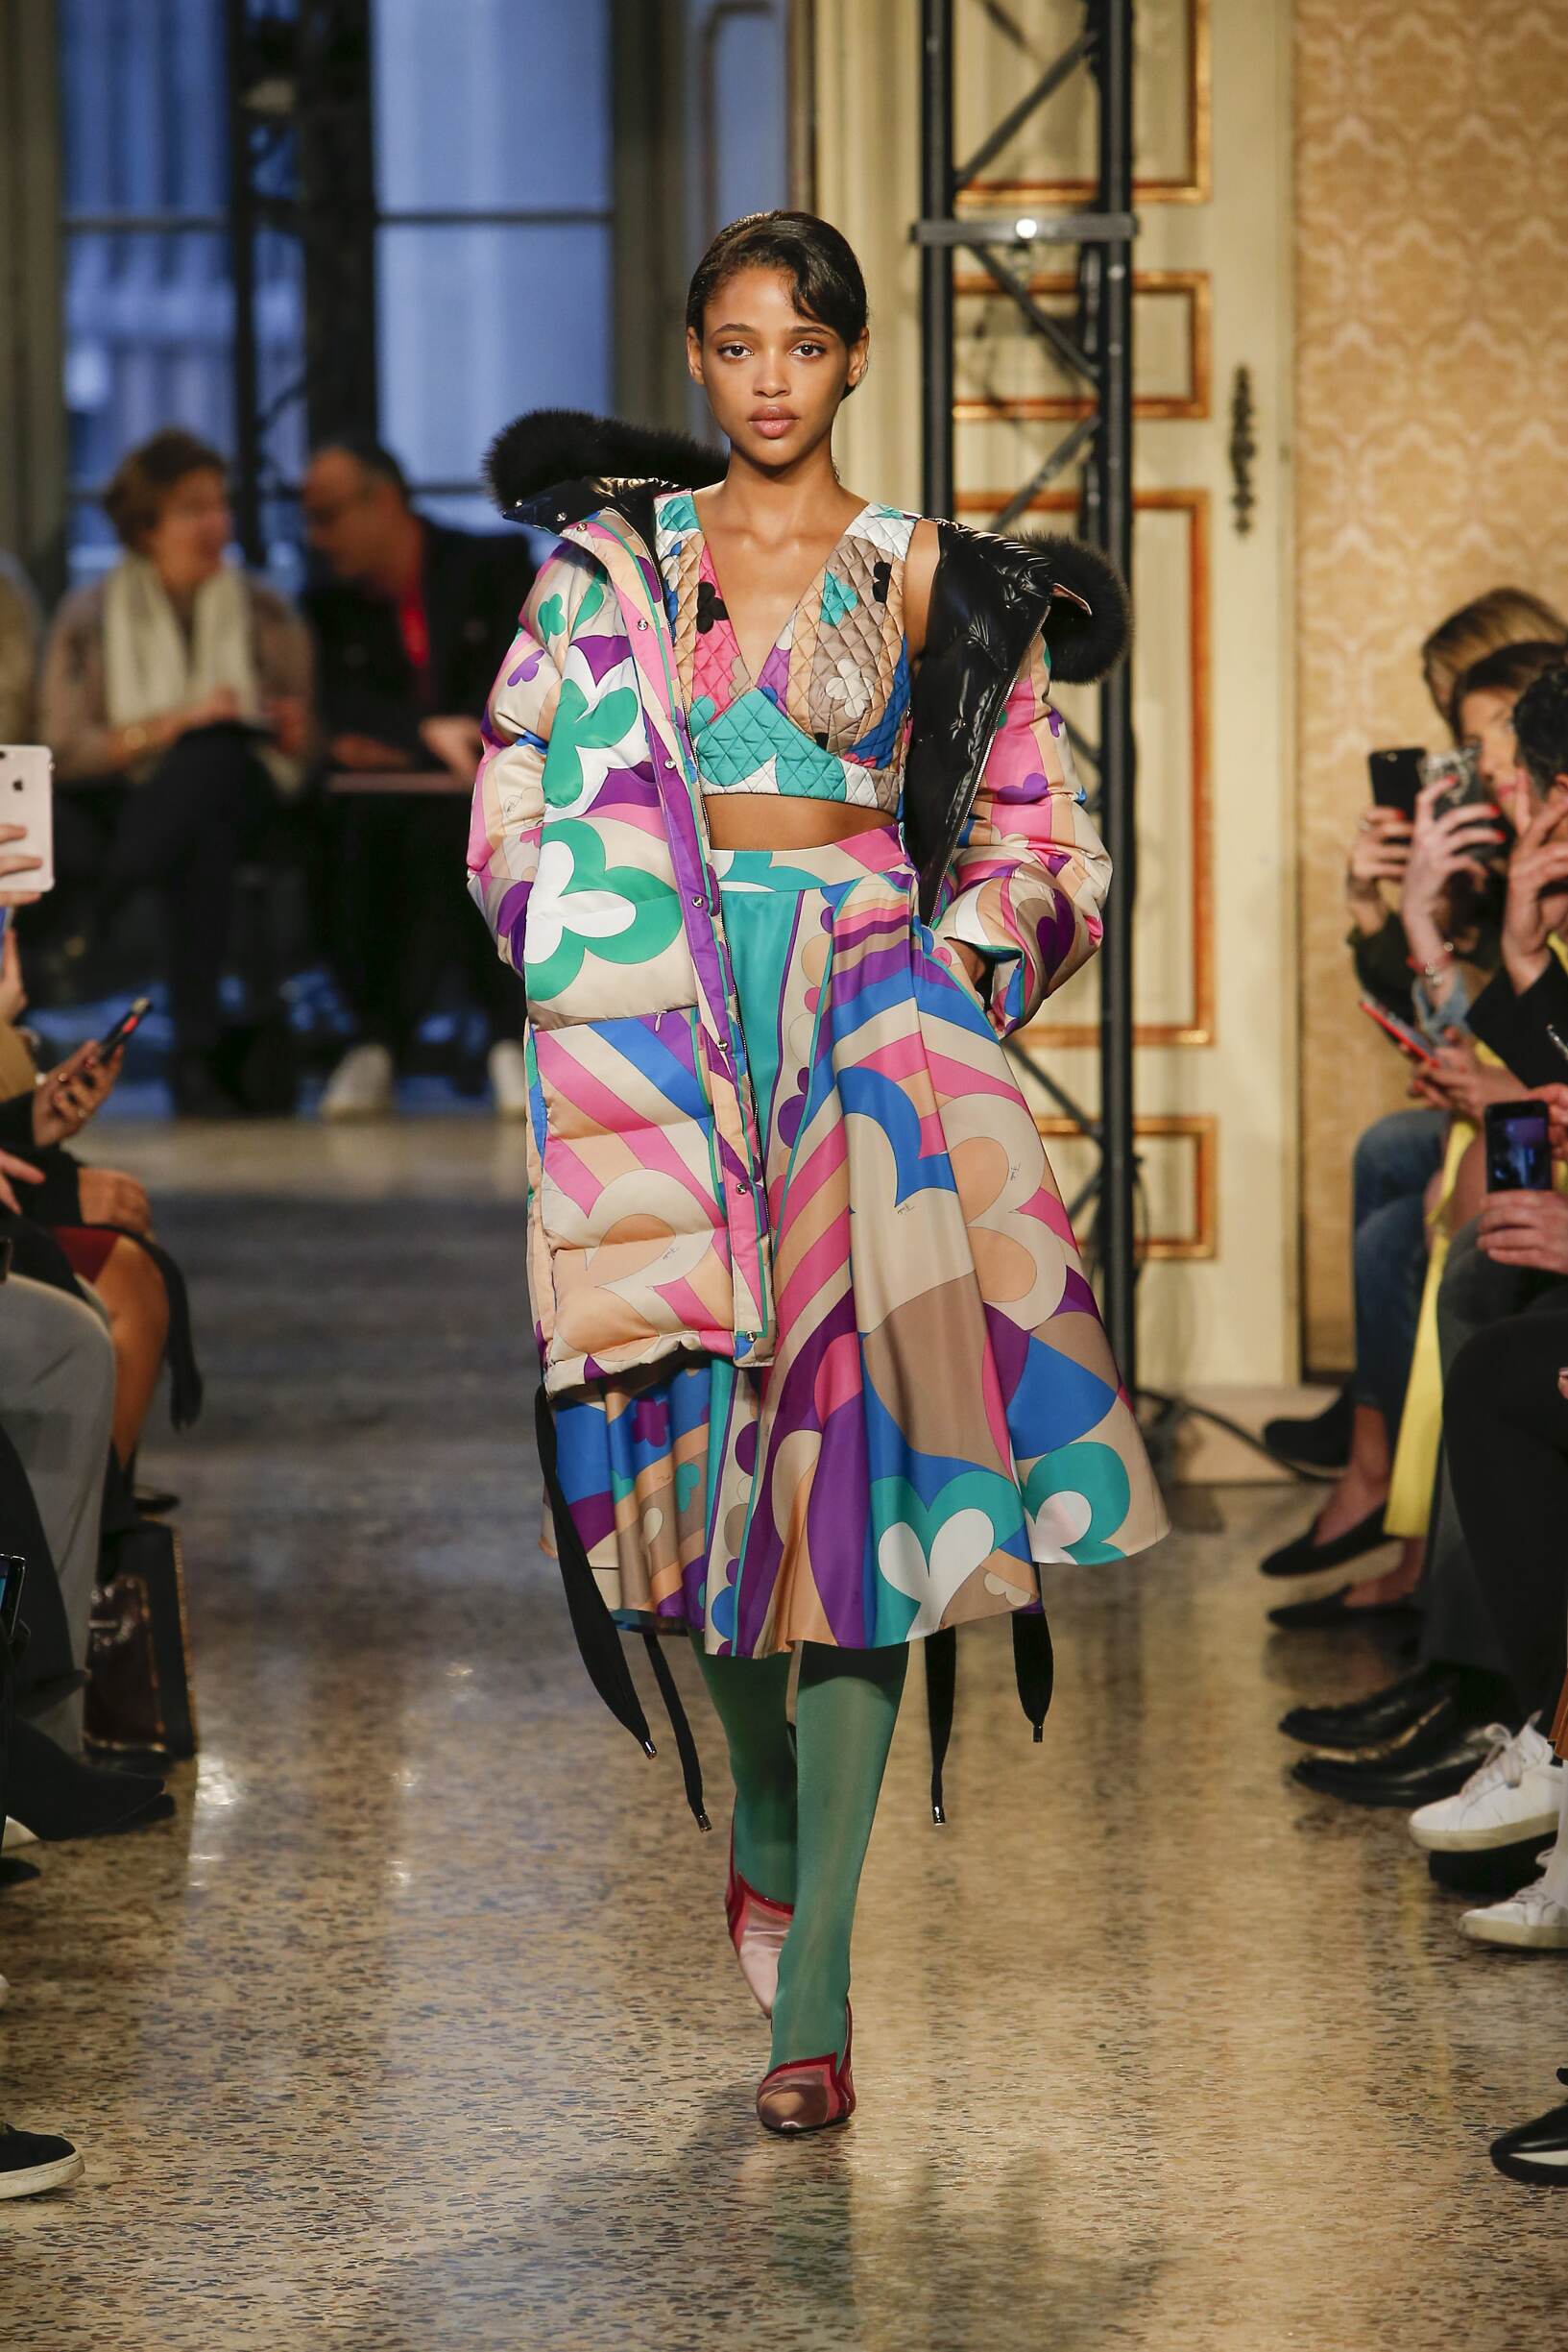 EMILIO PUCCI FALL WINTER 2018 WOMEN'S COLLECTION | The Skinny Beep